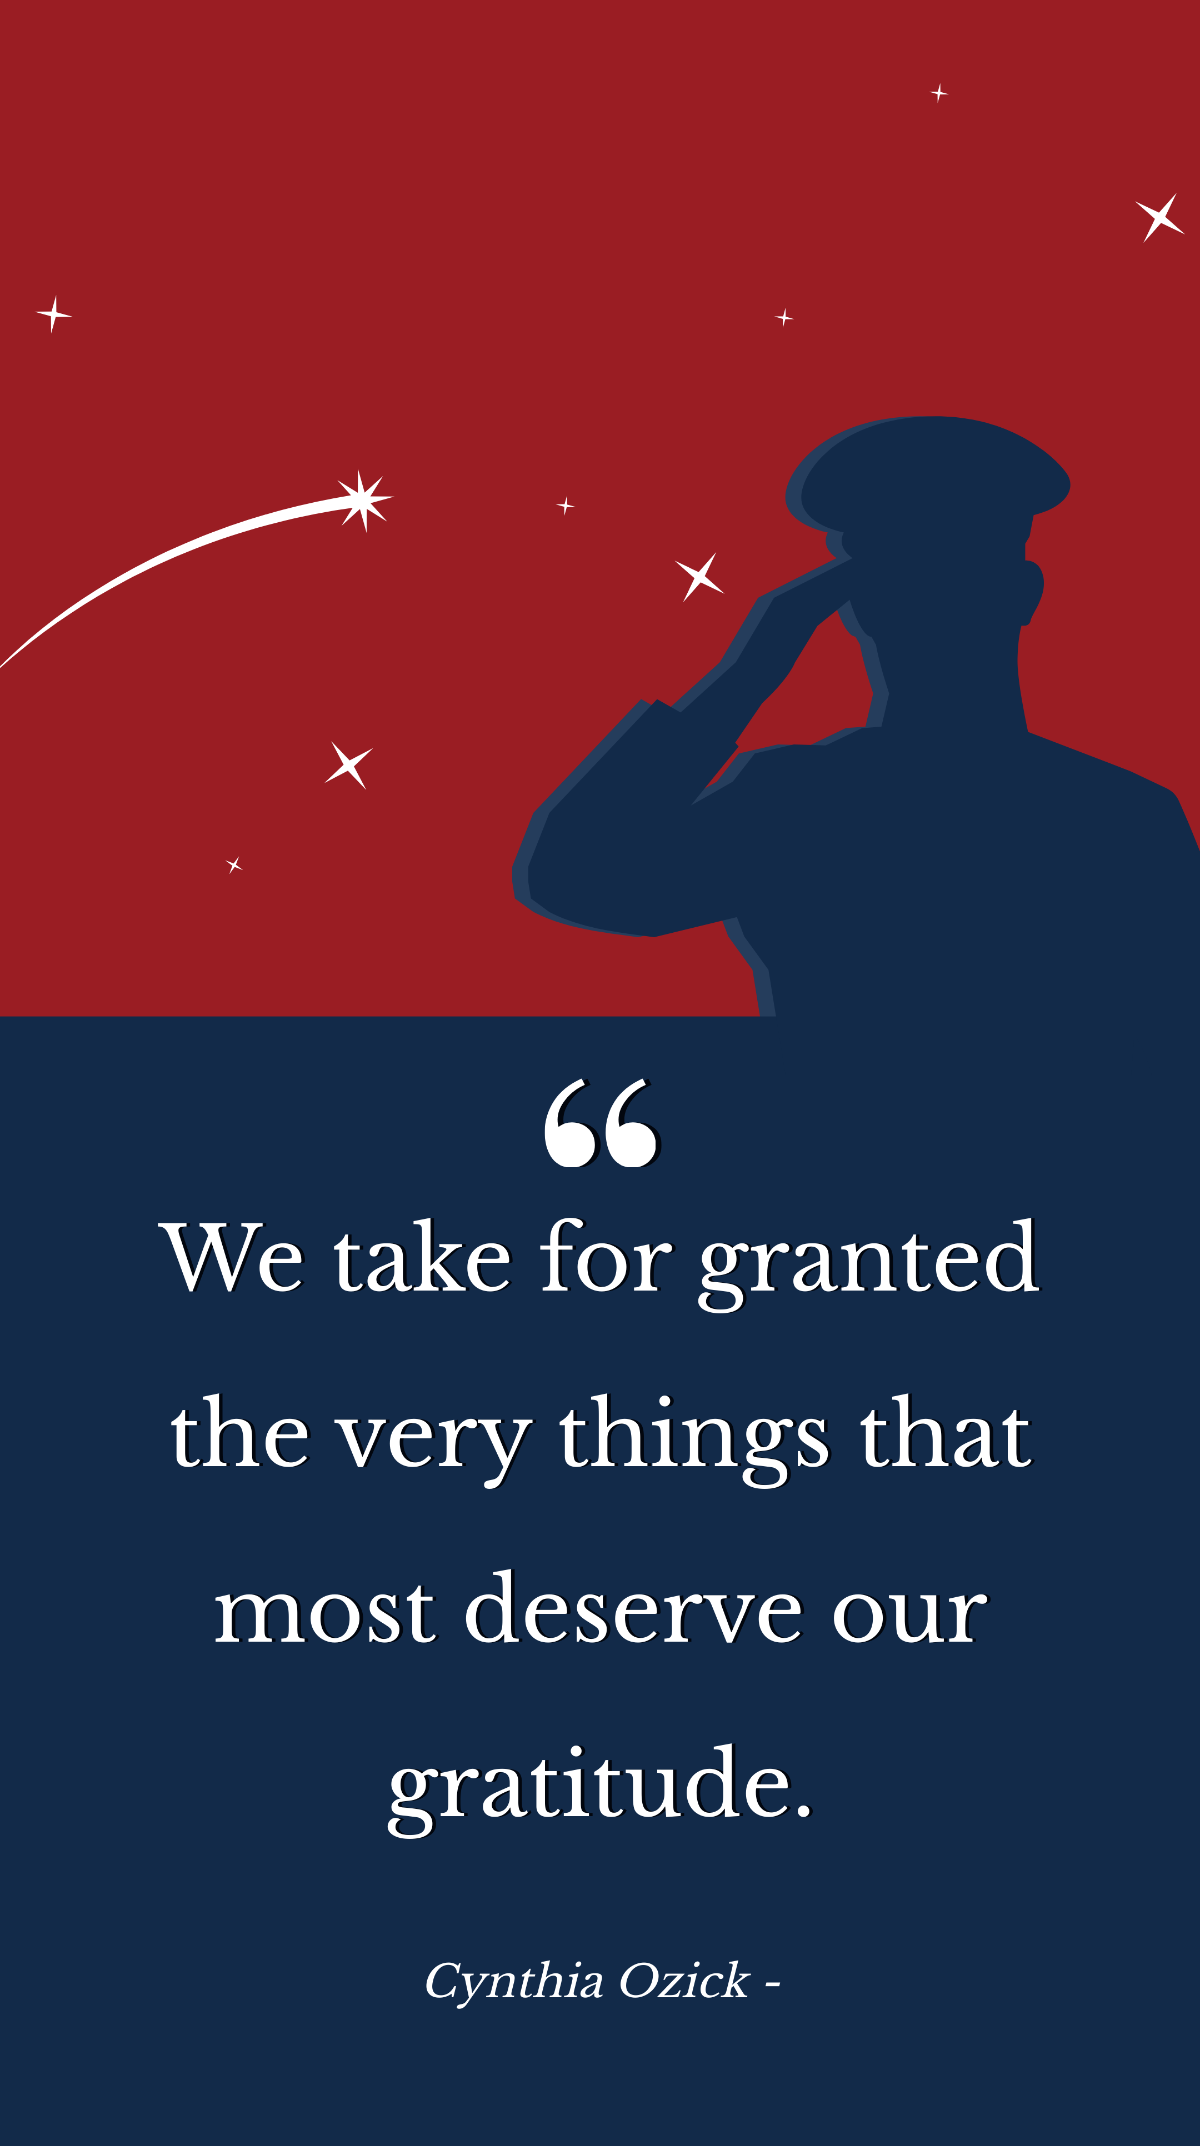 Cynthia Ozick - We take for granted the very things that most deserve our gratitude. Template